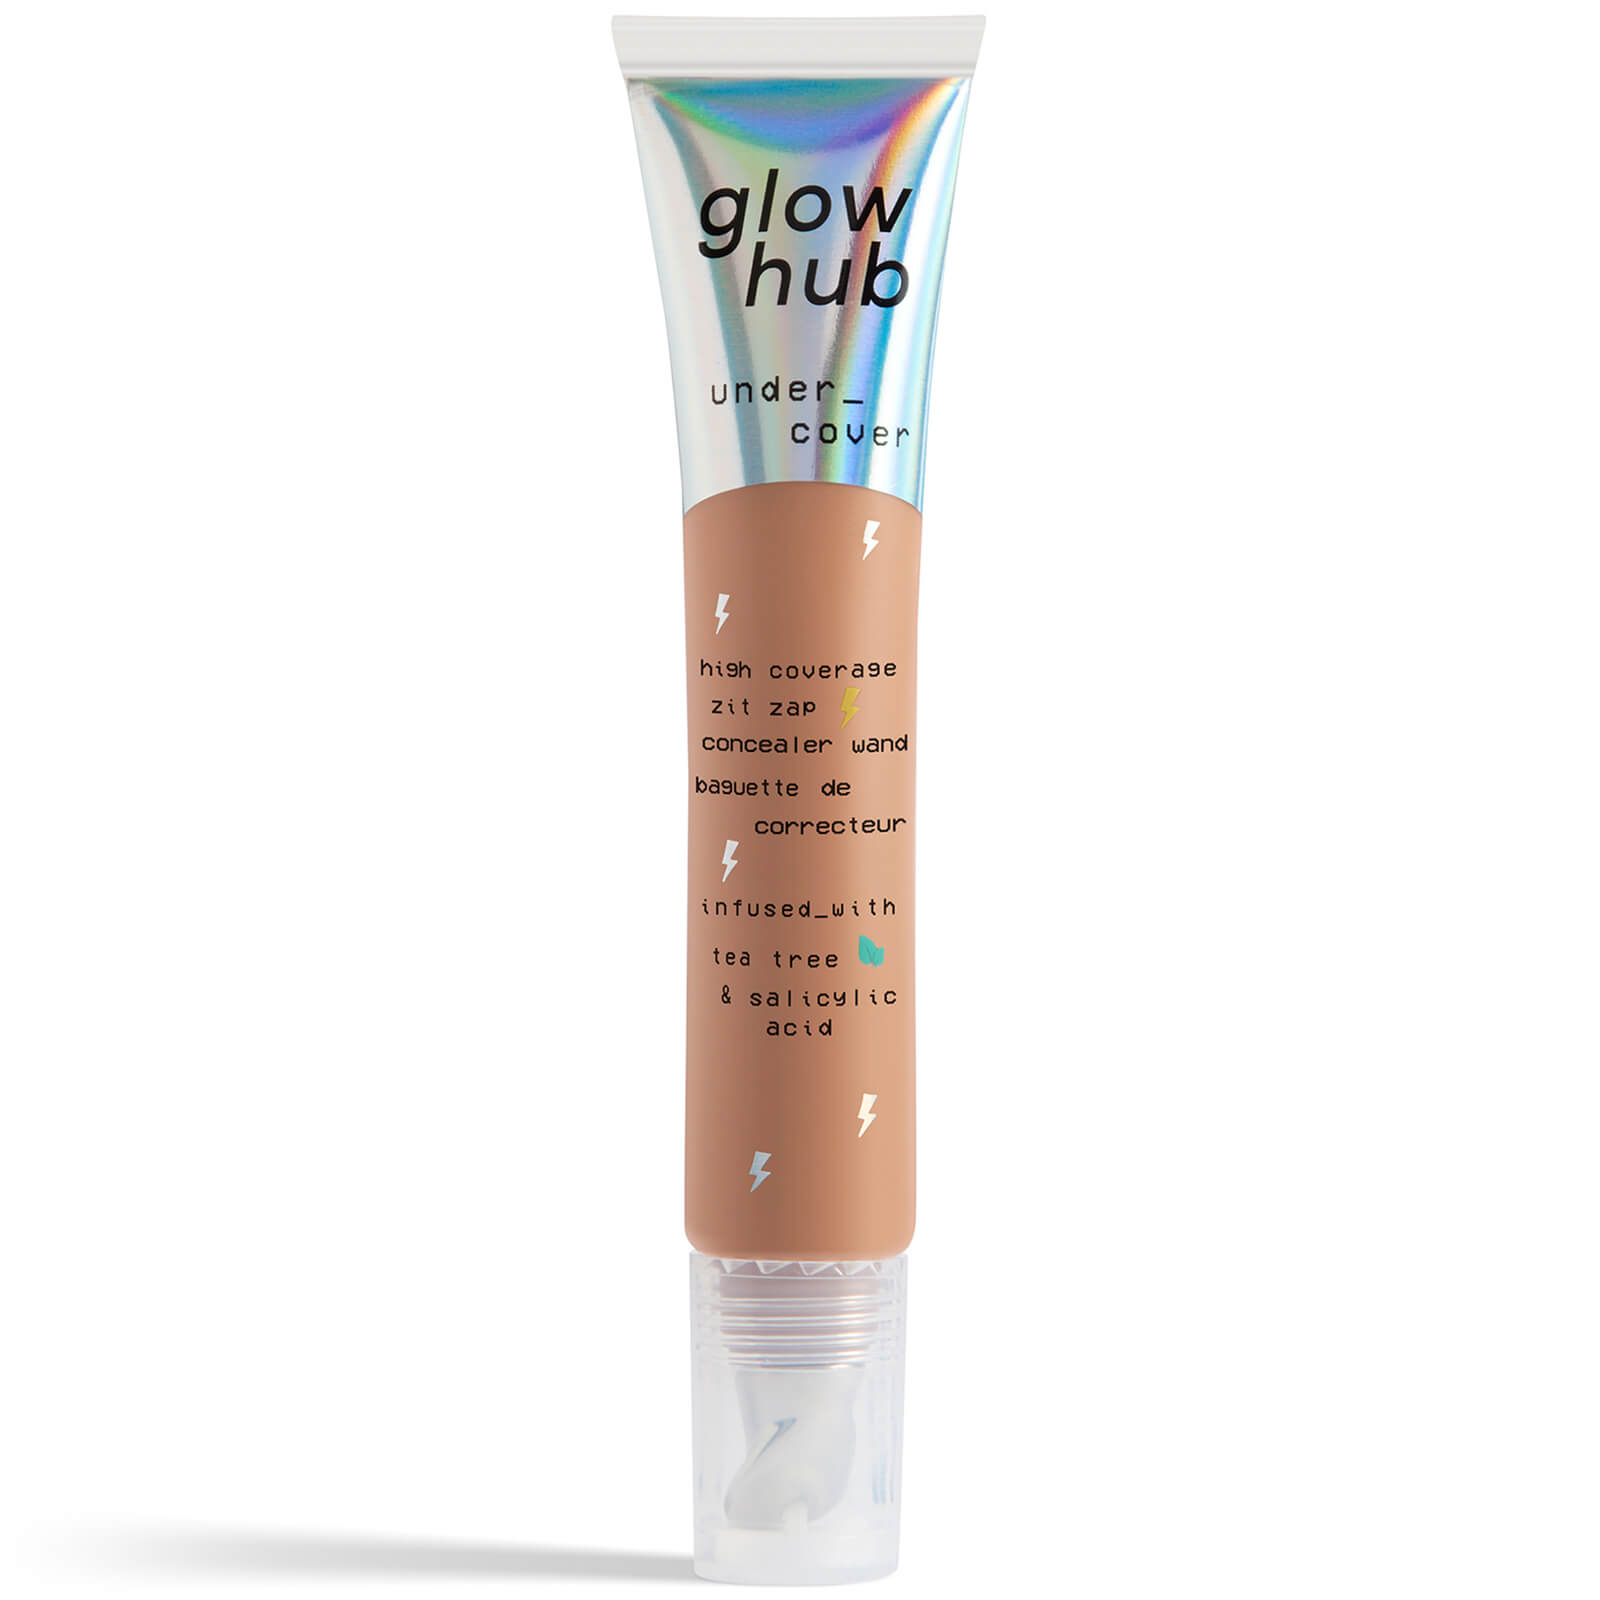 Glow Hub Under Cover High Coverage Zit Zap Concealer Wand 15ml (various Shades) - 16n In Brown